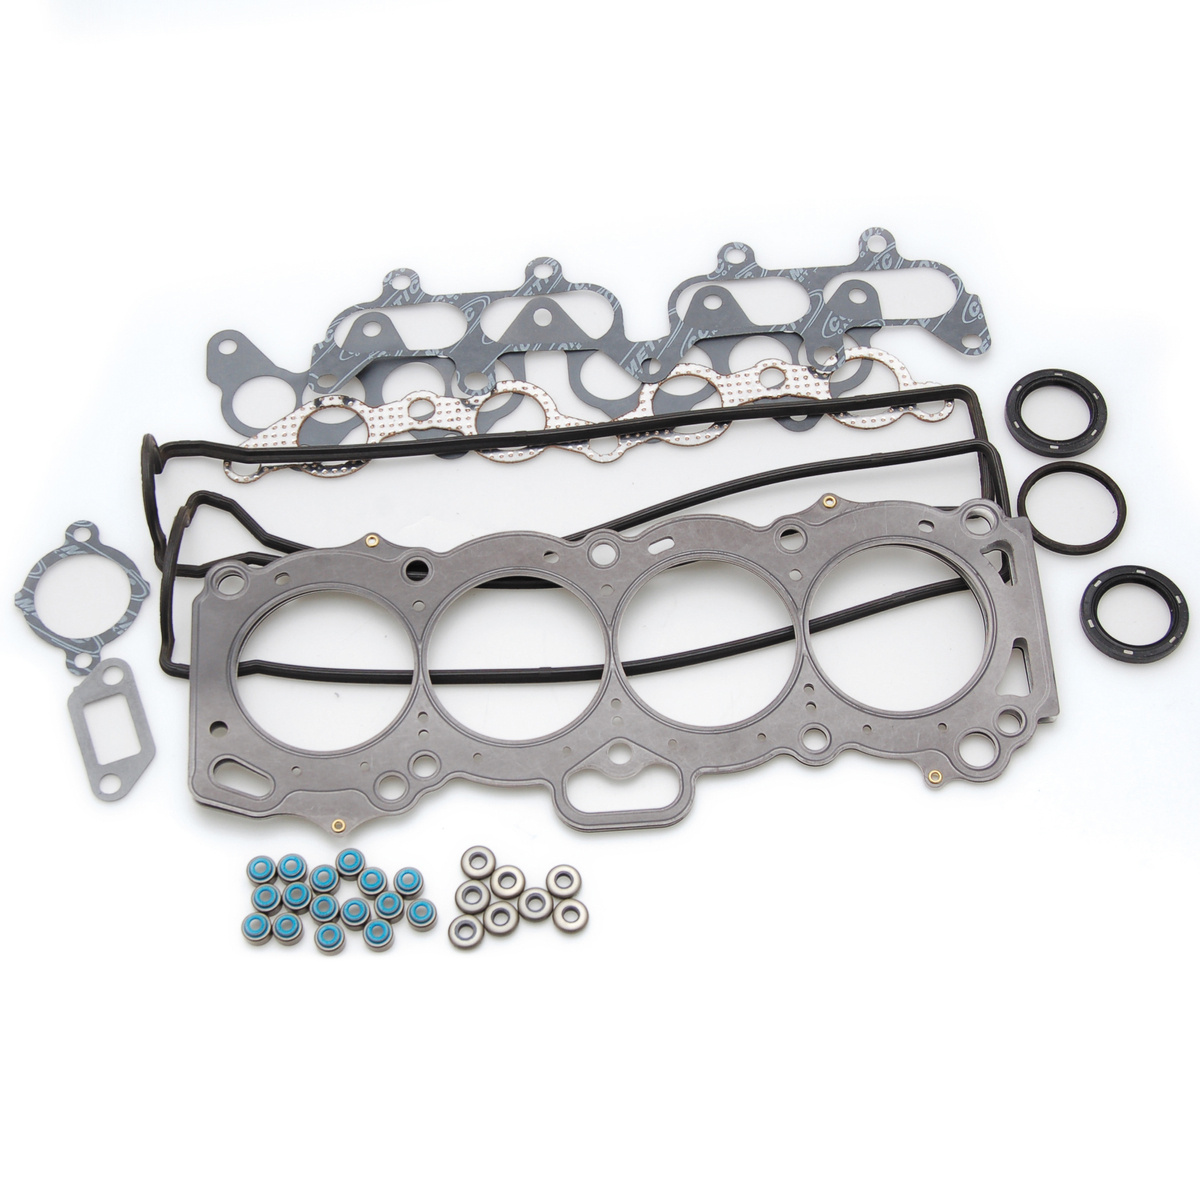 Cylinder Head Gasket Toyota 4A-GE Top End Gasket Kit, 83mm Bore, .051" MLS , 16-Valve Cometic PRO2041T-830-051